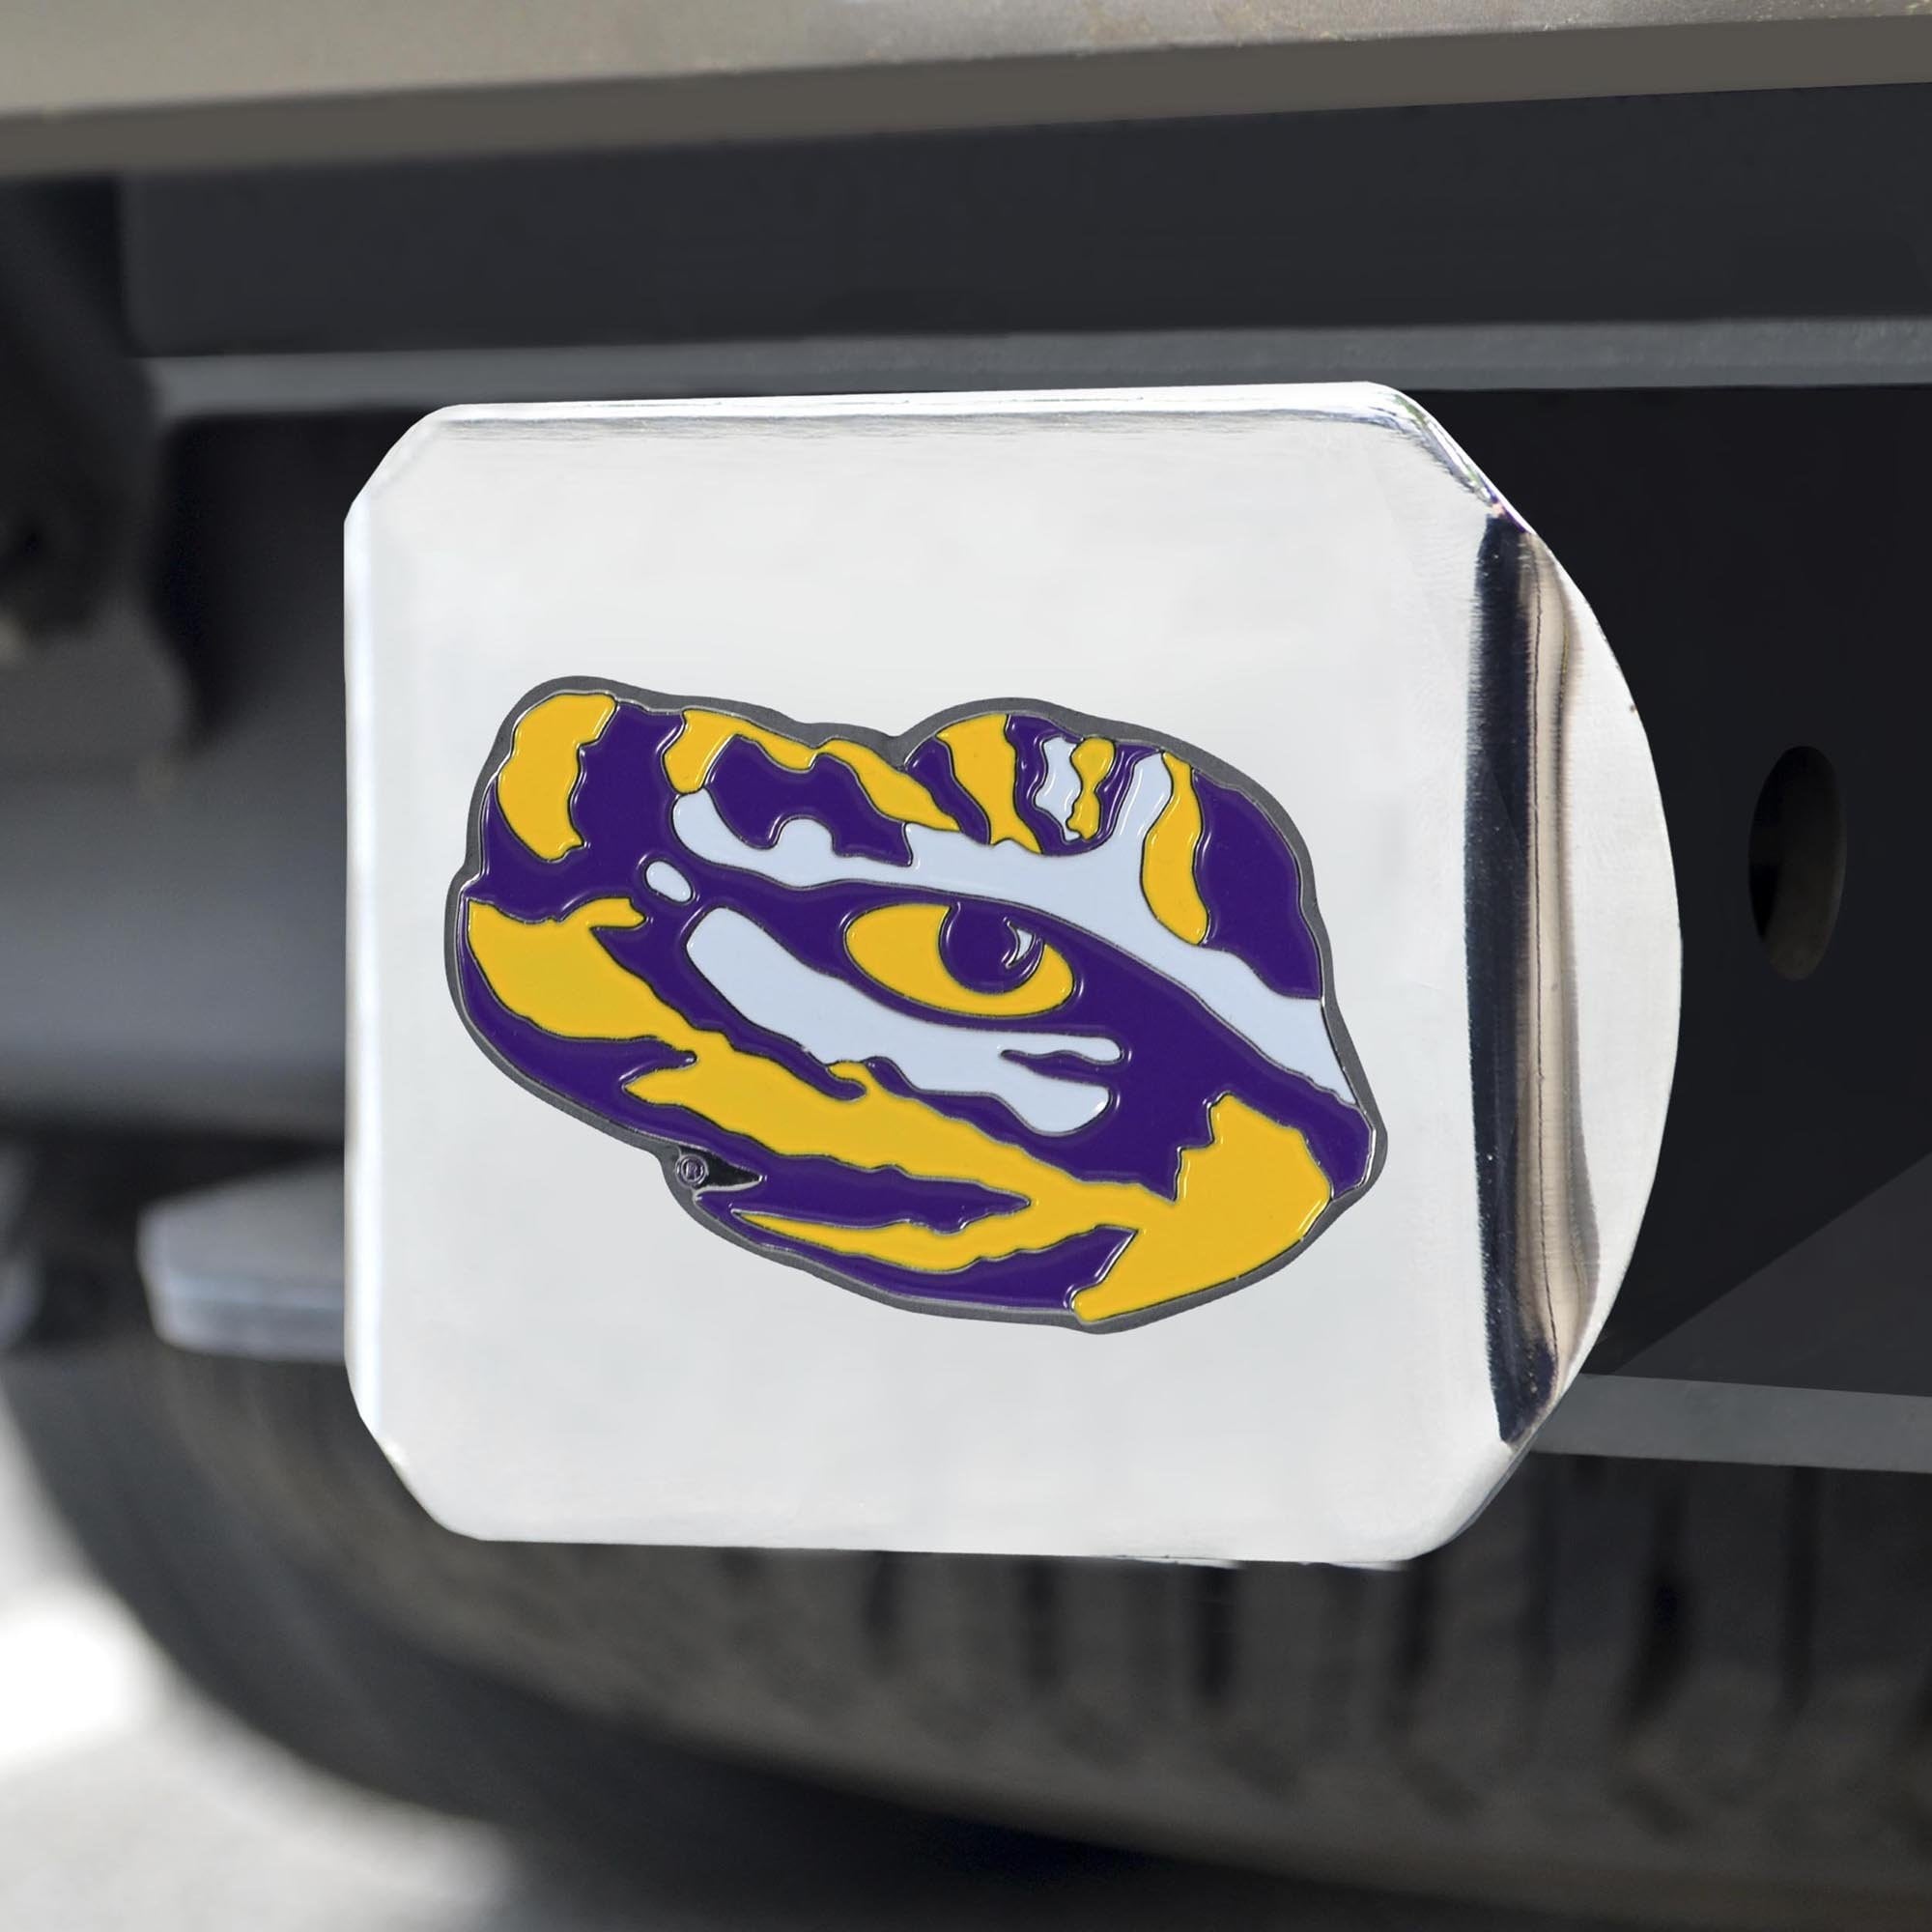 LSU Tigers Color Hitch Cover 3.4